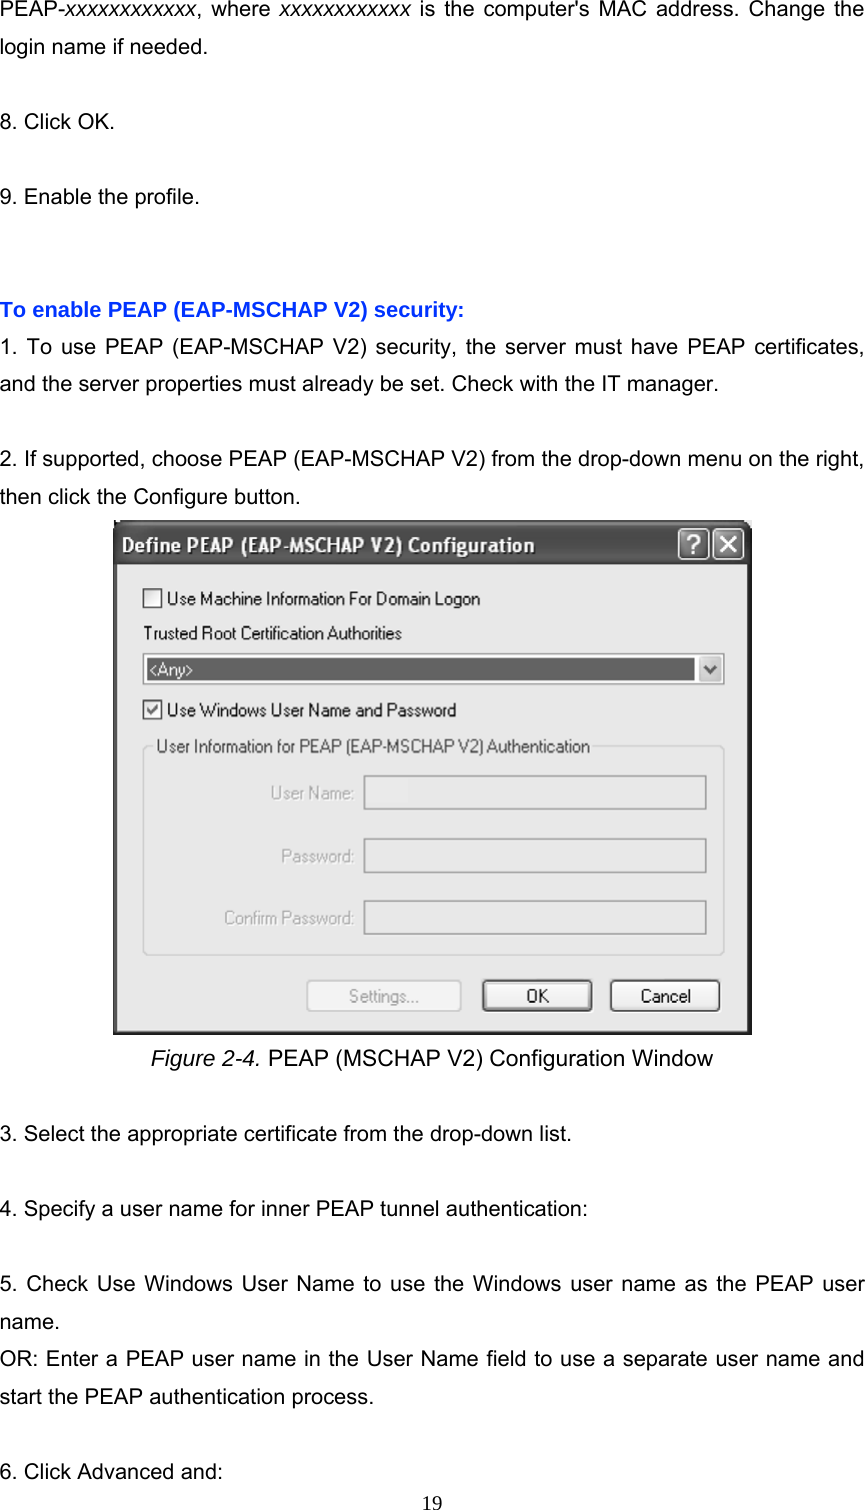 PEAP-xxxxxxxxxxxx, where xxxxxxxxxxxx is the computer&apos;s MAC address. Change the login name if needed.  8. Click OK.  9. Enable the profile.   To enable PEAP (EAP-MSCHAP V2) security: 1. To use PEAP (EAP-MSCHAP V2) security, the server must have PEAP certificates, and the server properties must already be set. Check with the IT manager.  2. If supported, choose PEAP (EAP-MSCHAP V2) from the drop-down menu on the right, then click the Configure button.  Figure 2-4. PEAP (MSCHAP V2) Configuration Window  3. Select the appropriate certificate from the drop-down list.  4. Specify a user name for inner PEAP tunnel authentication:  5. Check Use Windows User Name to use the Windows user name as the PEAP user name. OR: Enter a PEAP user name in the User Name field to use a separate user name and start the PEAP authentication process.  6. Click Advanced and:  19